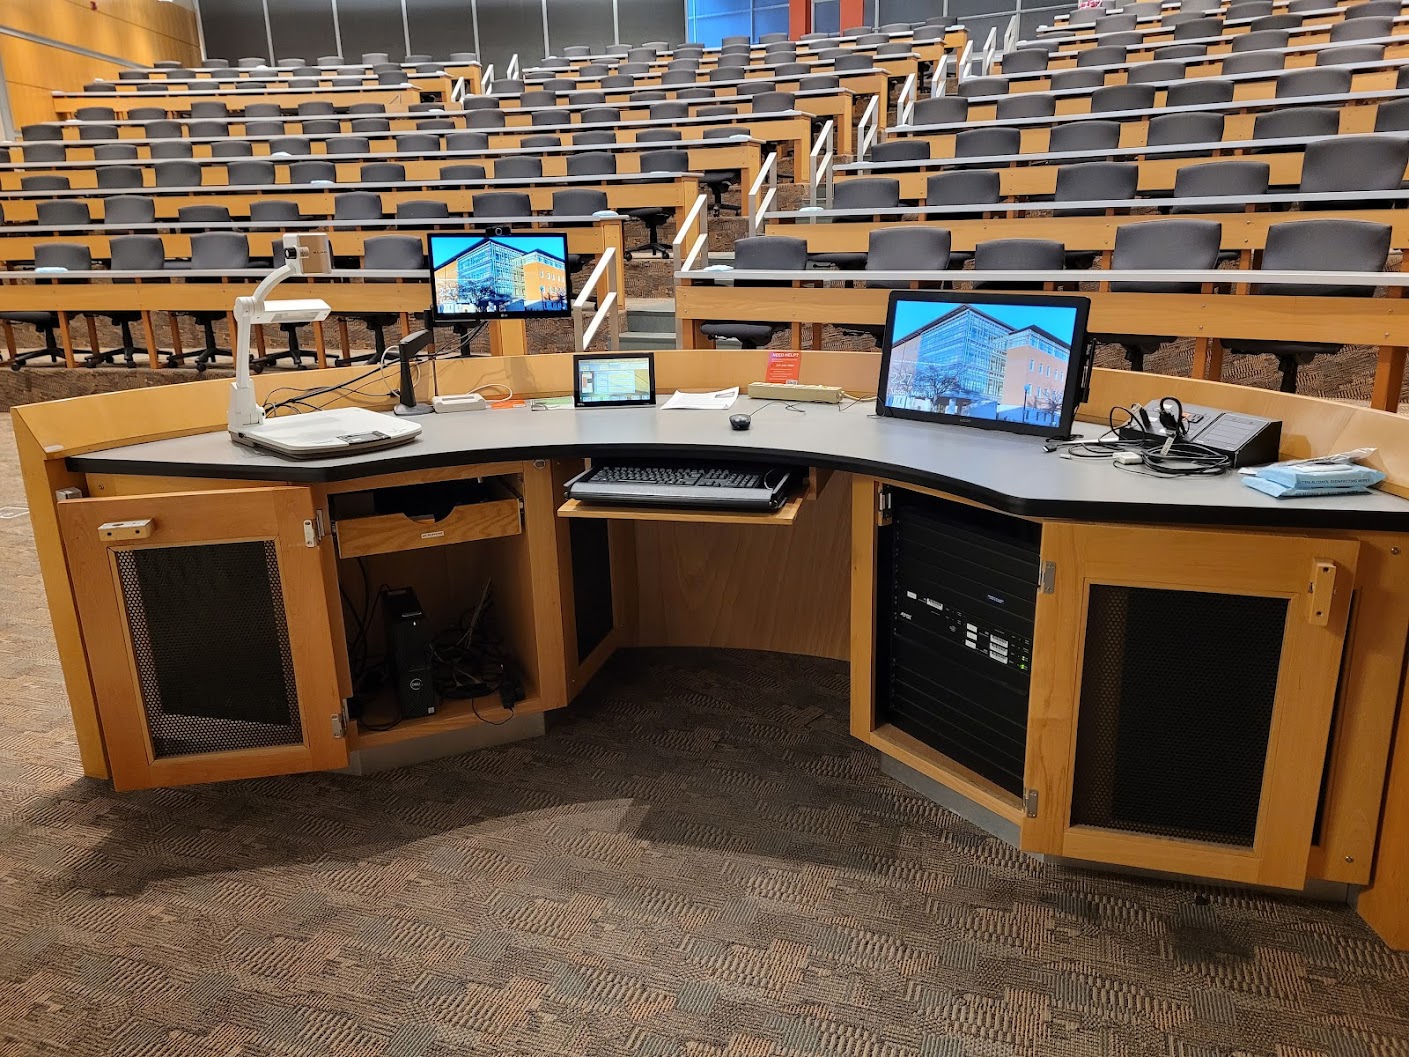 Image of a classroom lectern with a PC monitor and document camera.